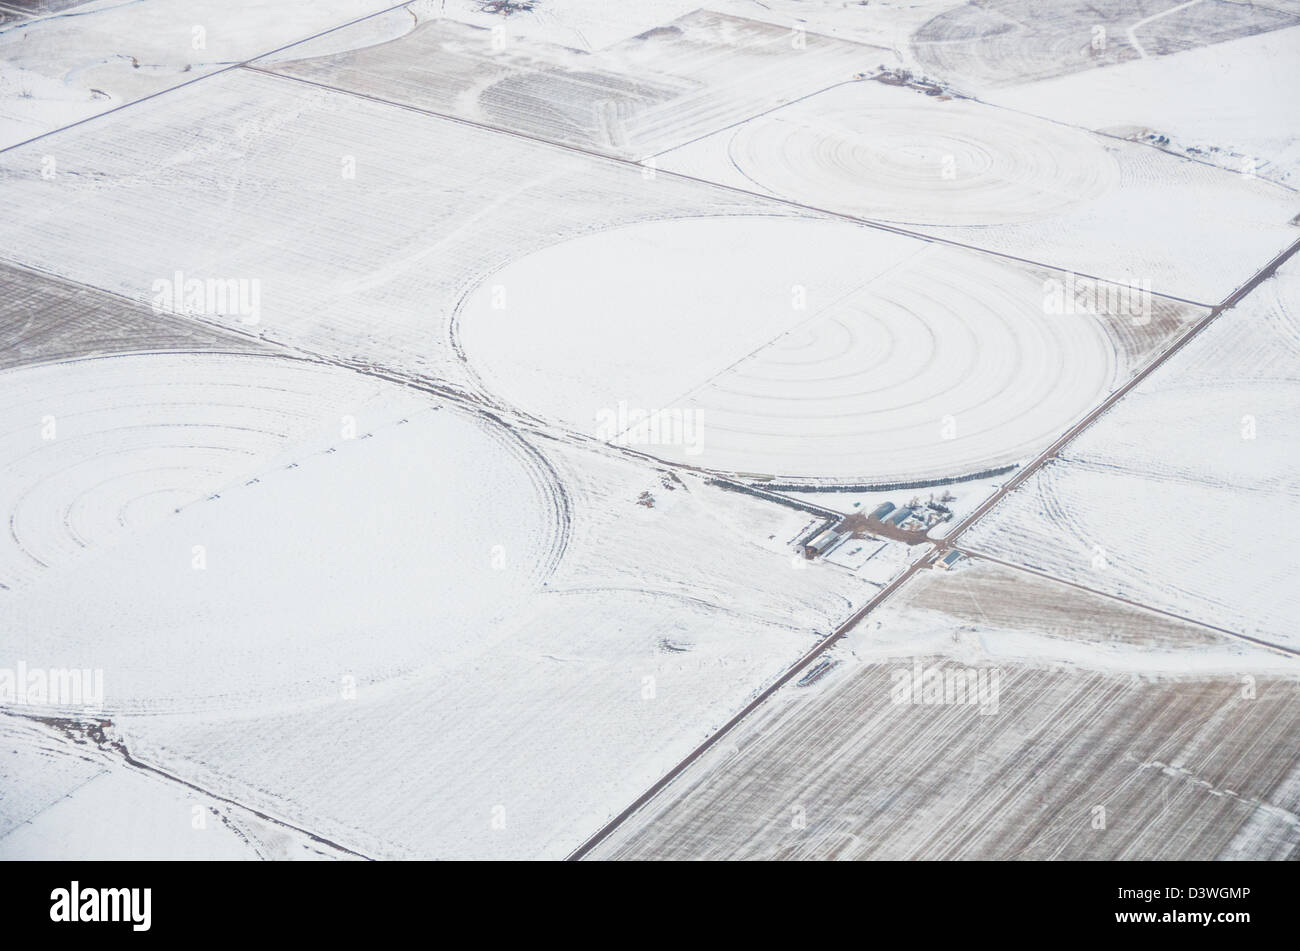 An aerial view of irrigated cropland in the winter with circles Stock Photo